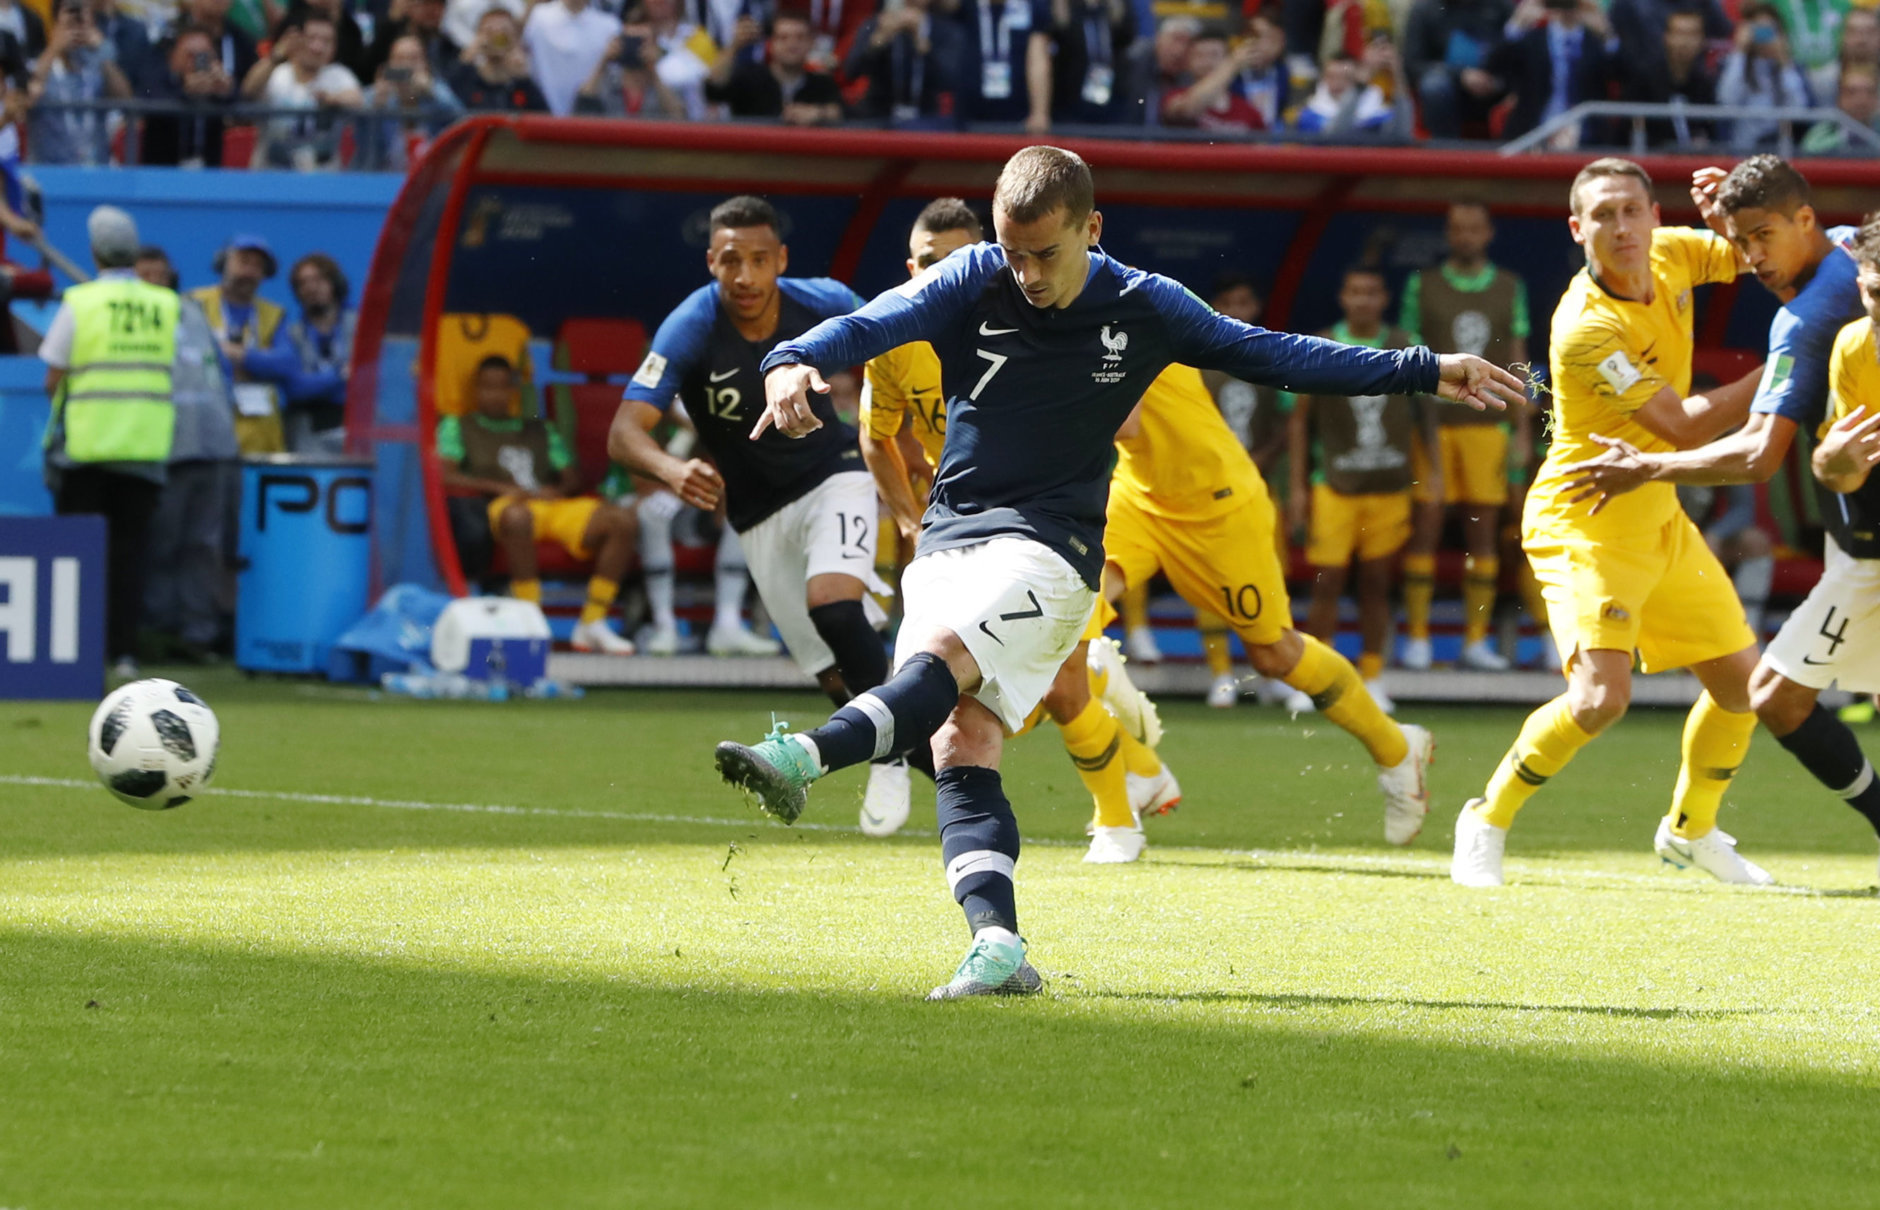 France's Antoine Griezmann scores the penalty goal during the group C match between France and Australia at the 2018 soccer World Cup in the Kazan Arena in Kazan, Russia, Saturday, June 16, 2018. (AP Photo/Darko Bandic)